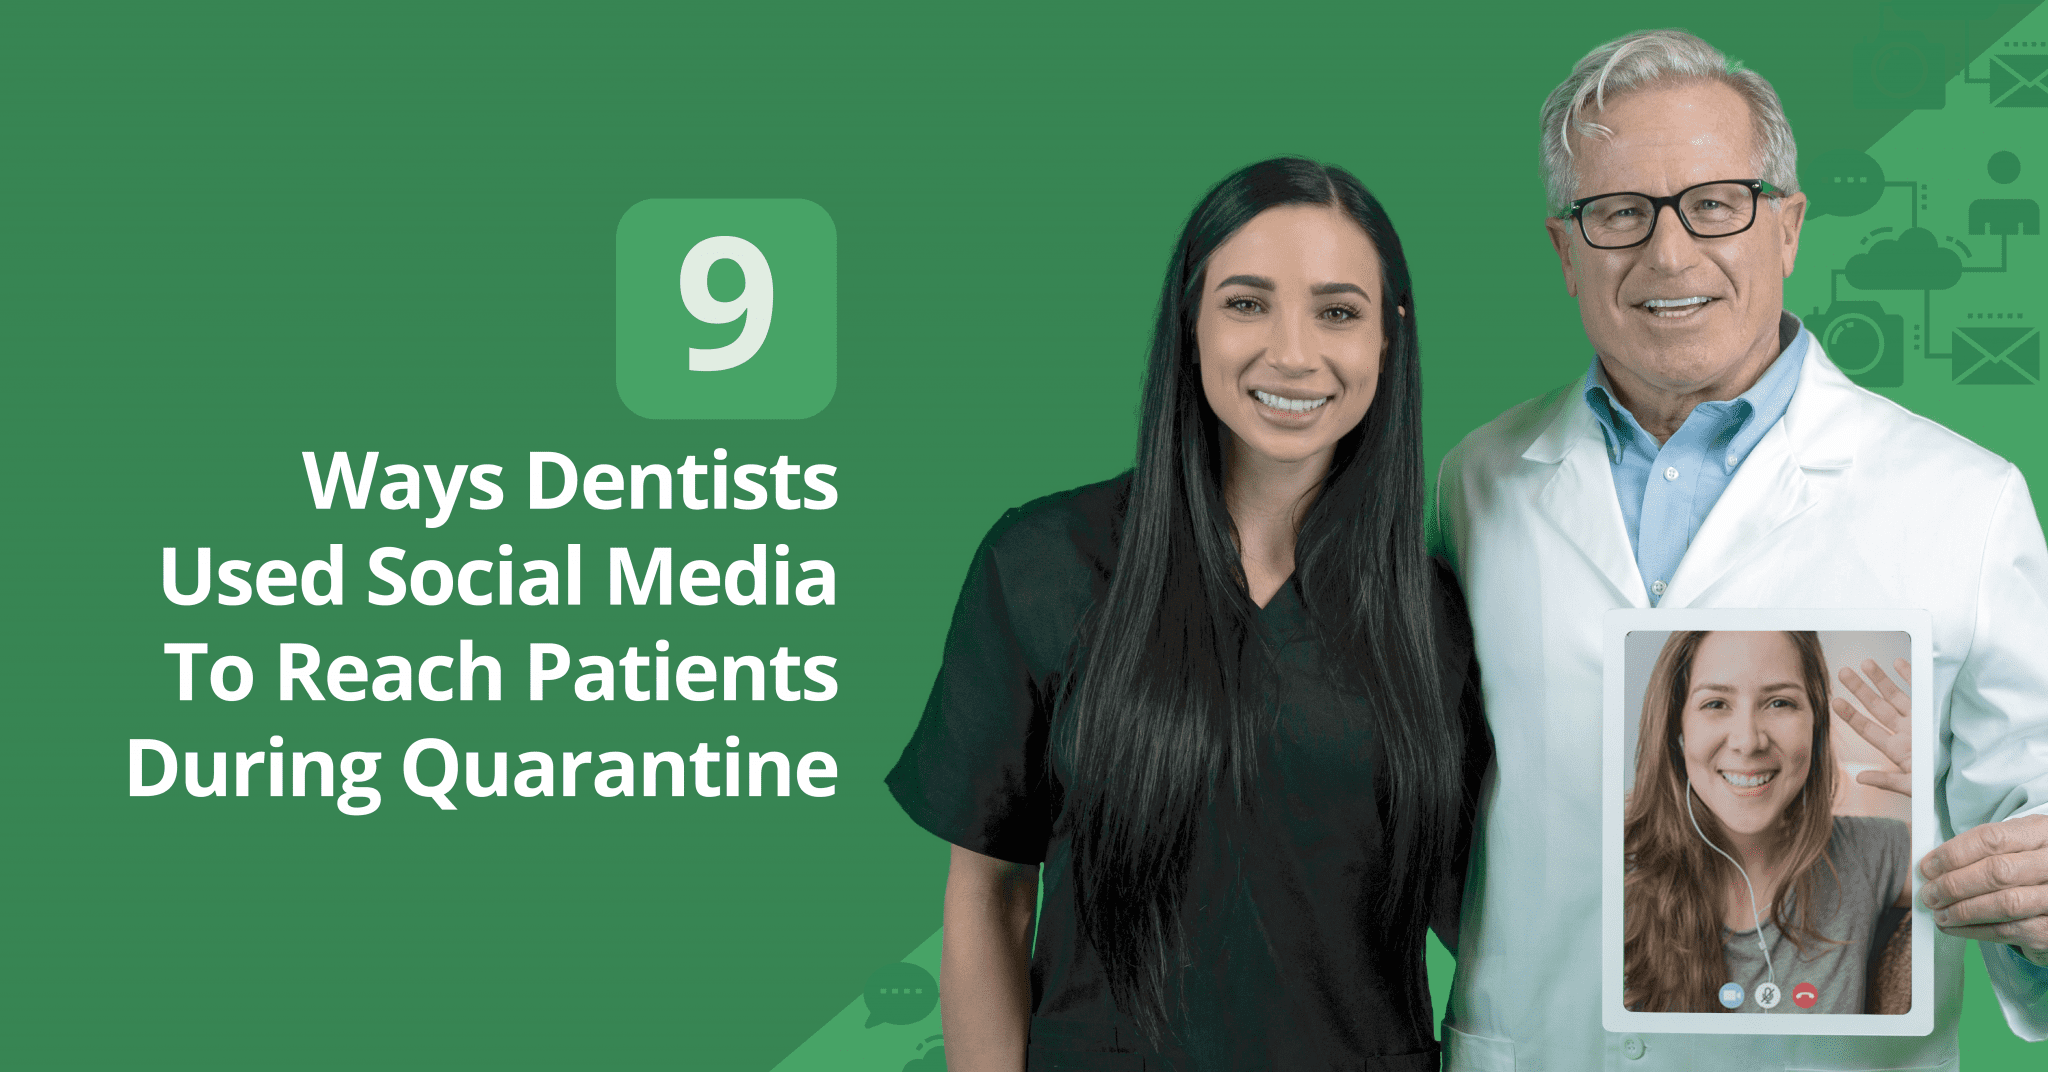 My Social Practice - Social Media Marketing for Dental & Dental Specialty Practices - Marketing Strategies for Orthodontists